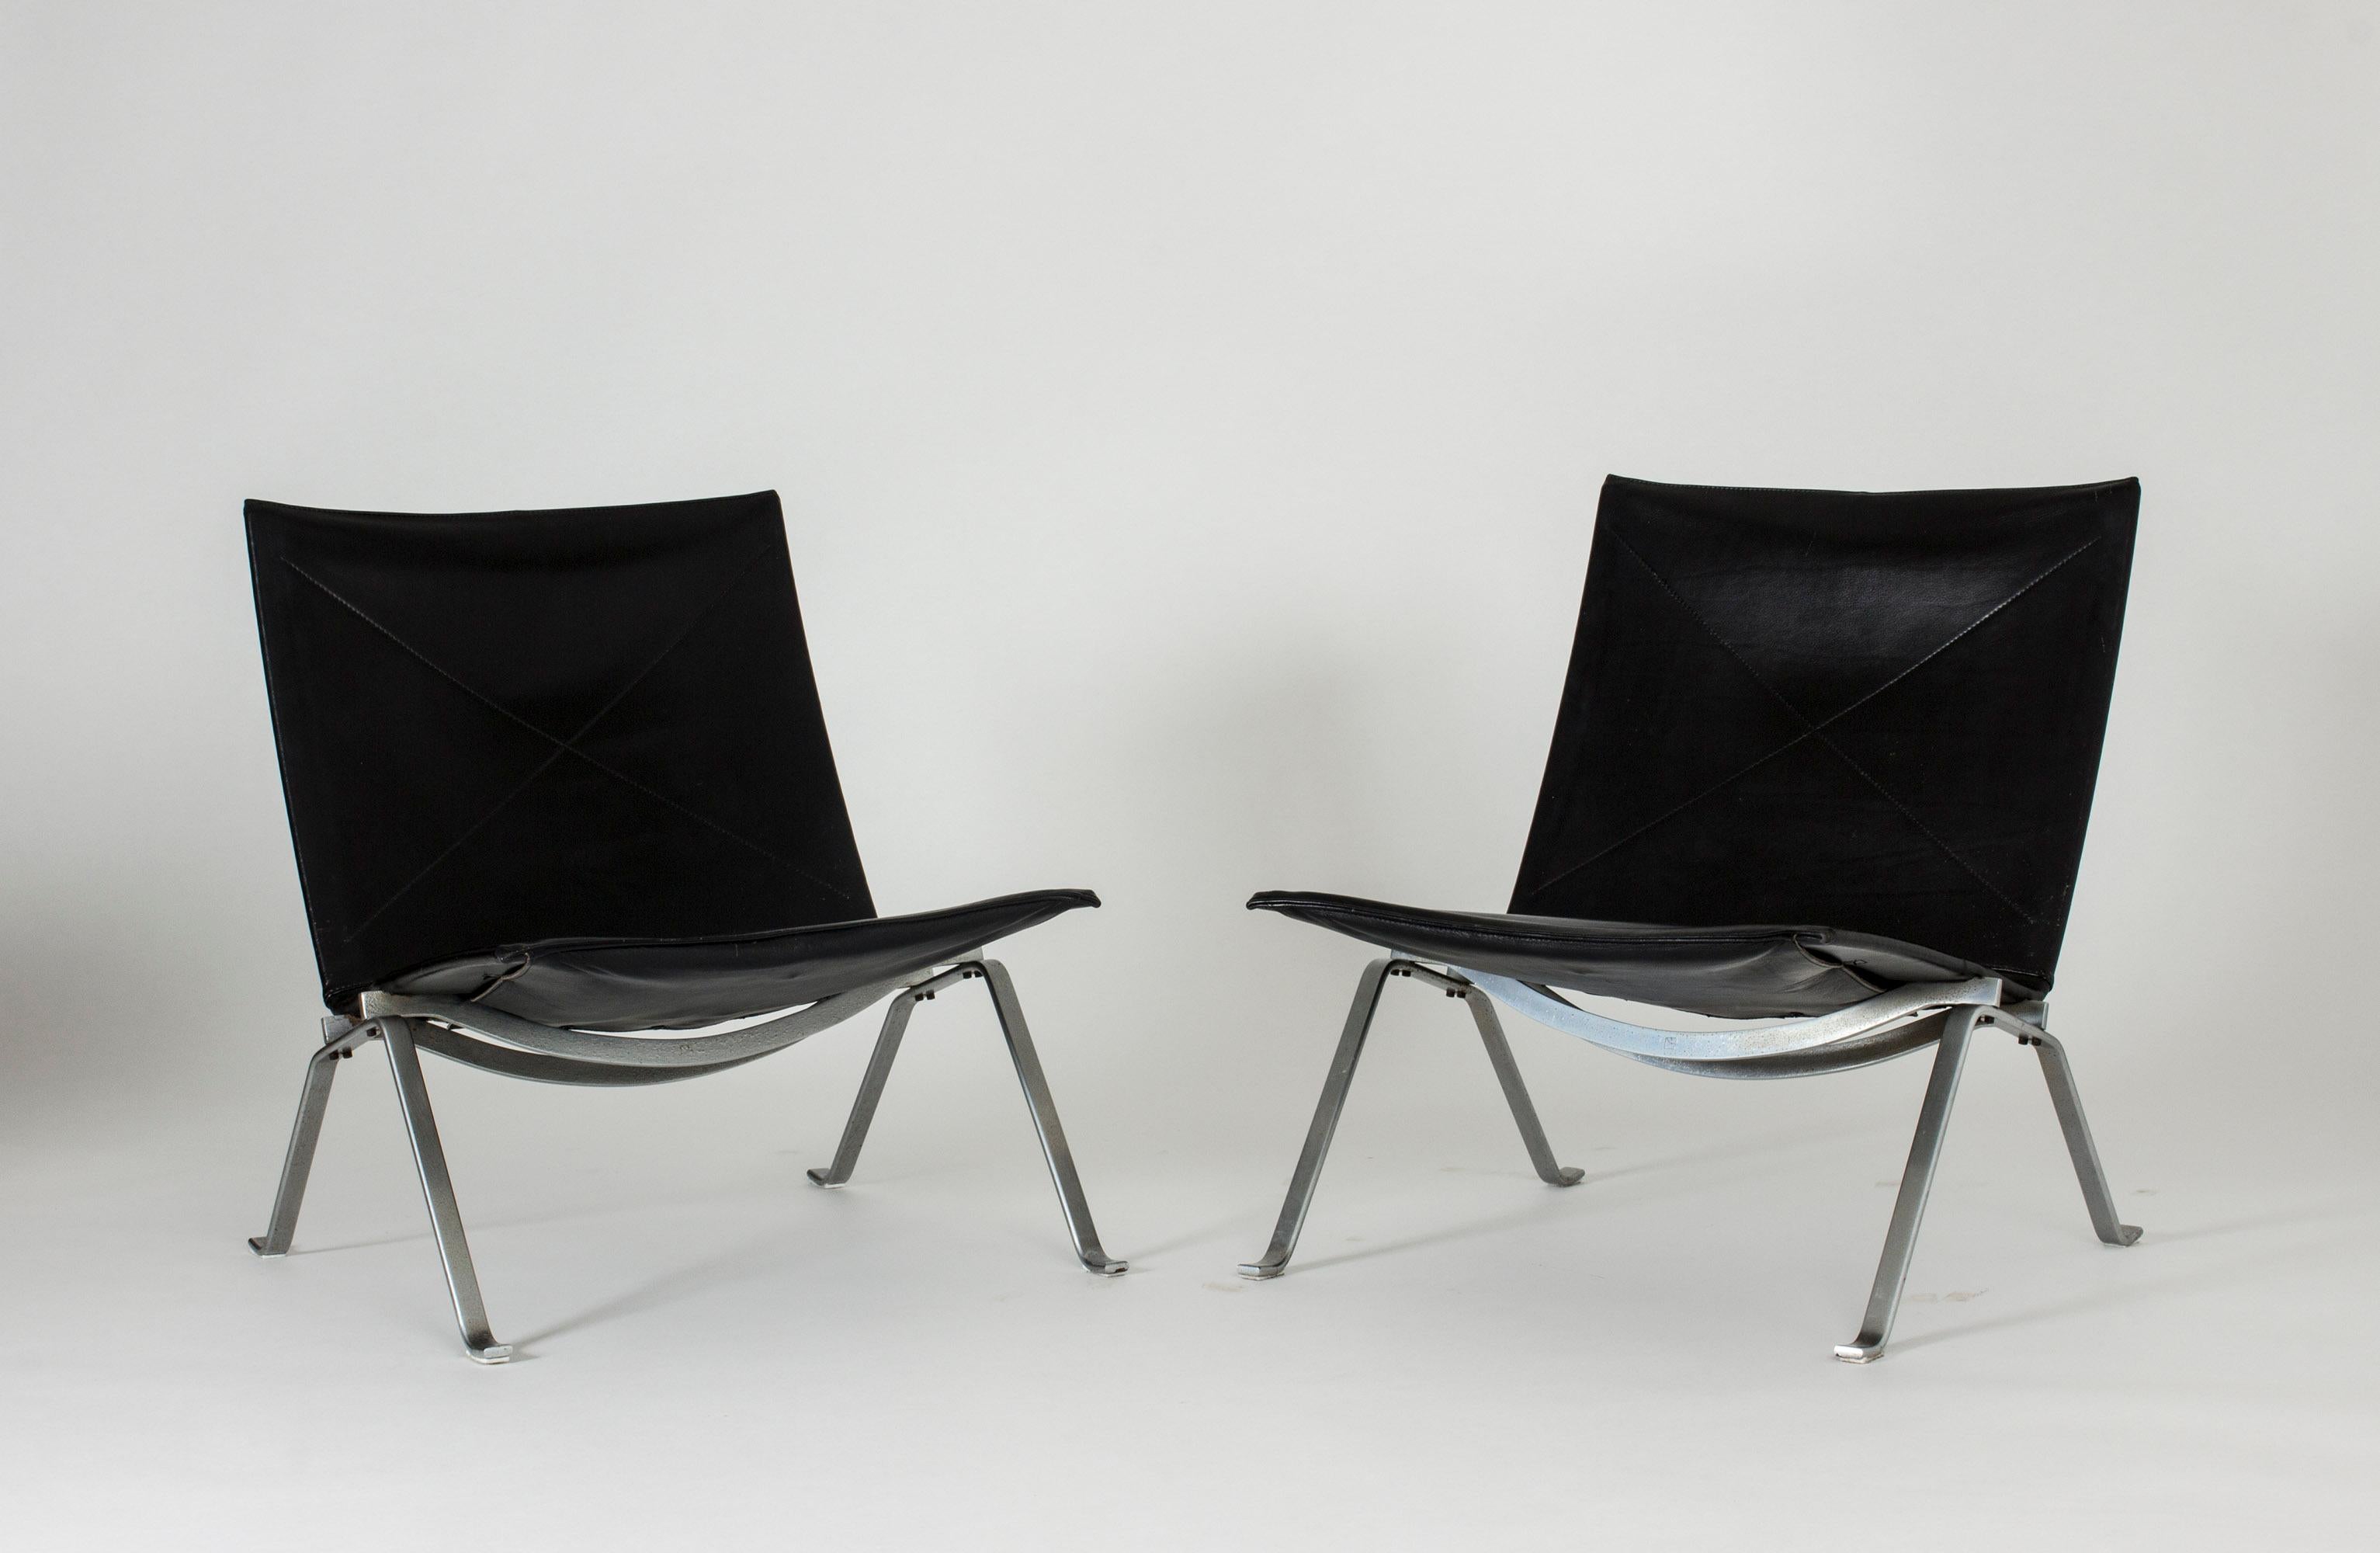 Pair of “PK 22” lounge chairs by Poul Kjaerholm, made with very nice aged black leather and brushed steel frames. Made by original producer E. Kold Christensen.